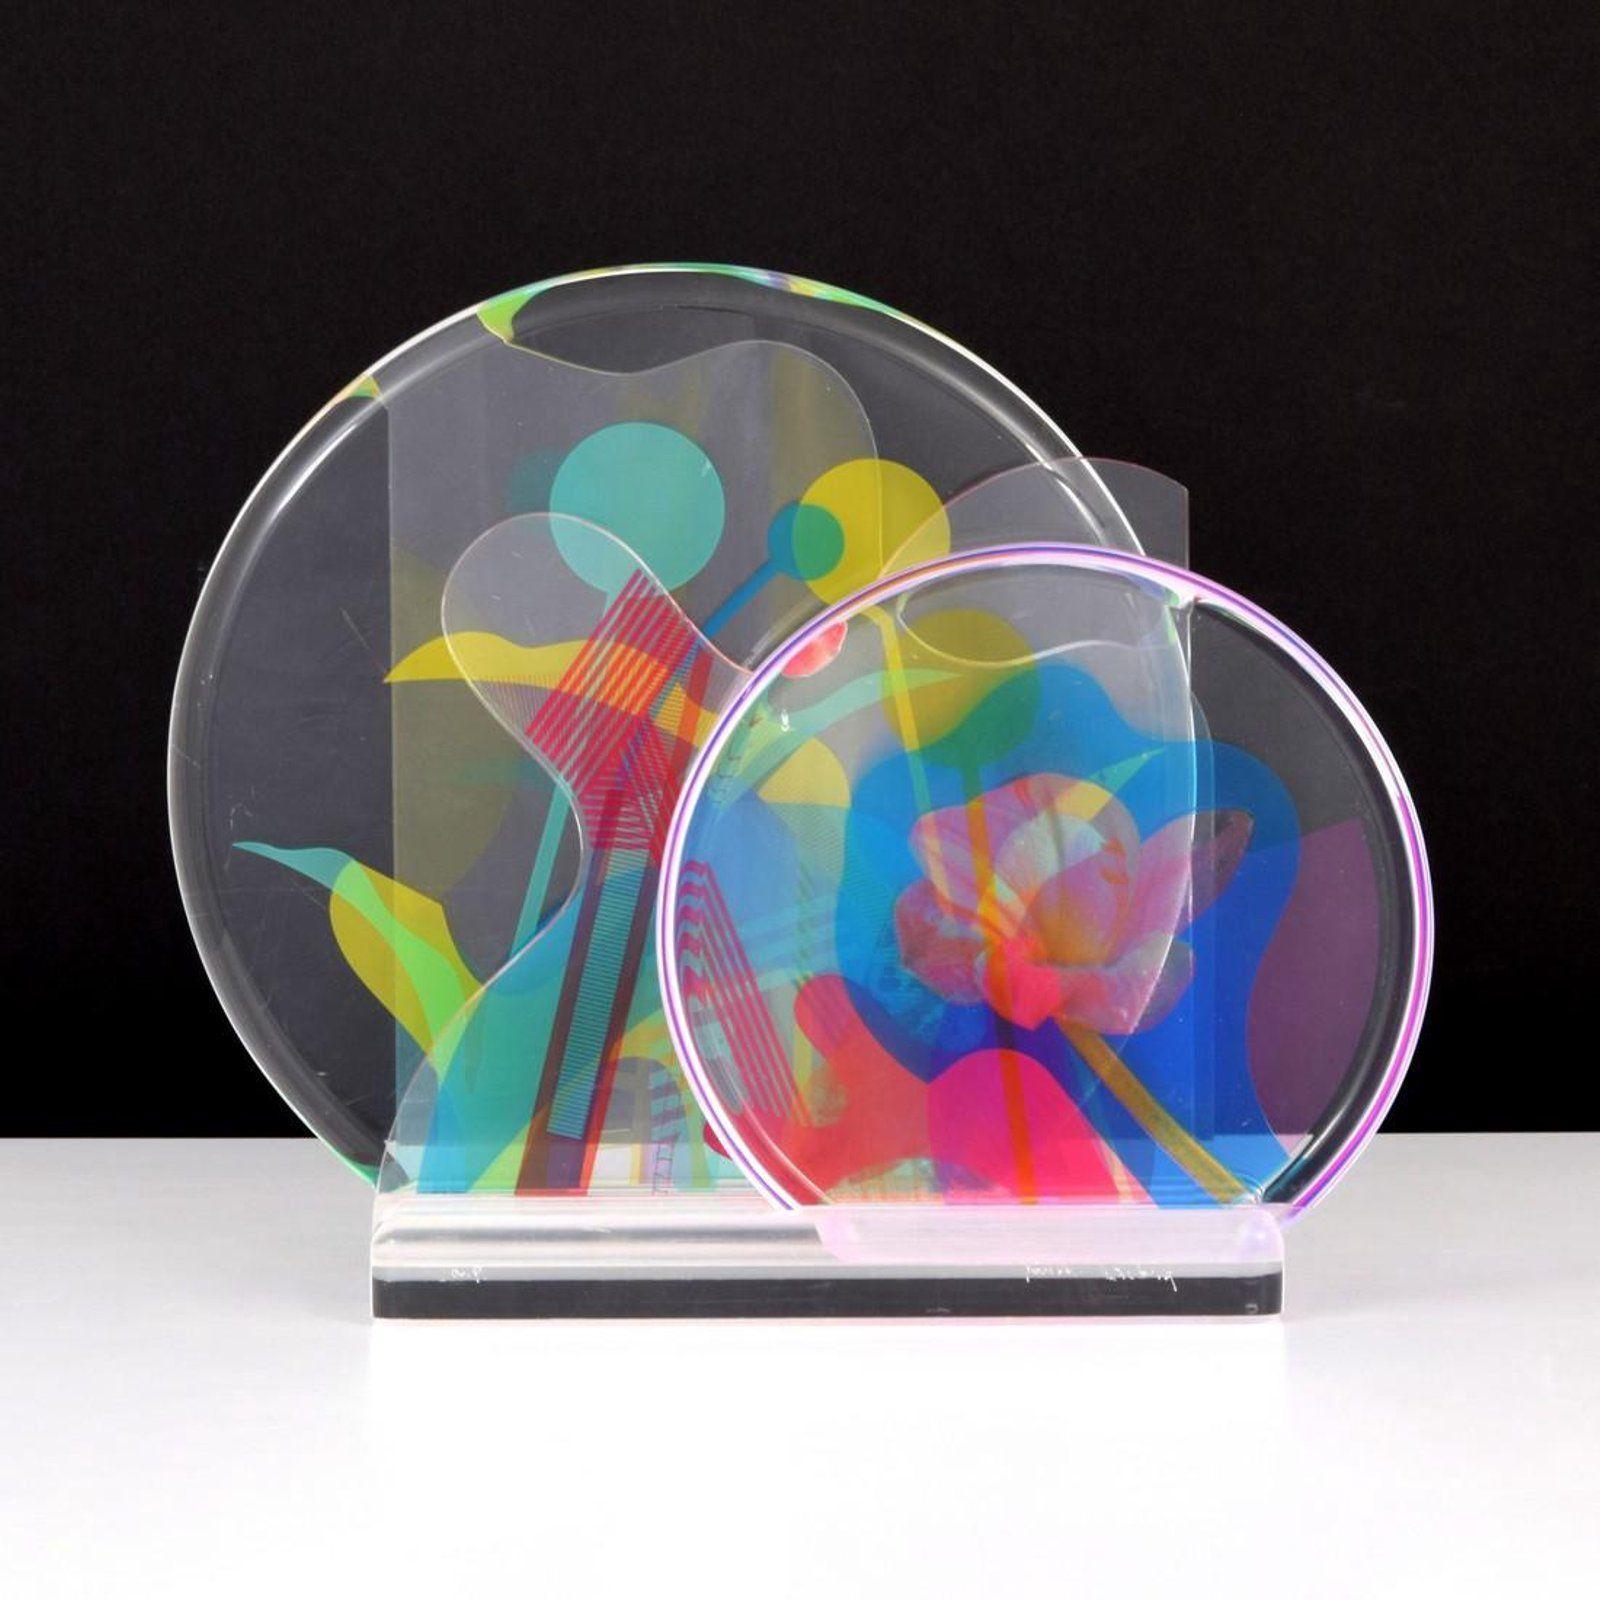 Yankel Ginzburg
Artist Proof
"Breeze"
Acrylic serigraphic sculpture
15.5" x 15" x 5"
1989
Condition: Excellent with minor wear
Sculpture is comprised of five pieces which can be arranged to your liking.   The sculpture is signed by the artist and